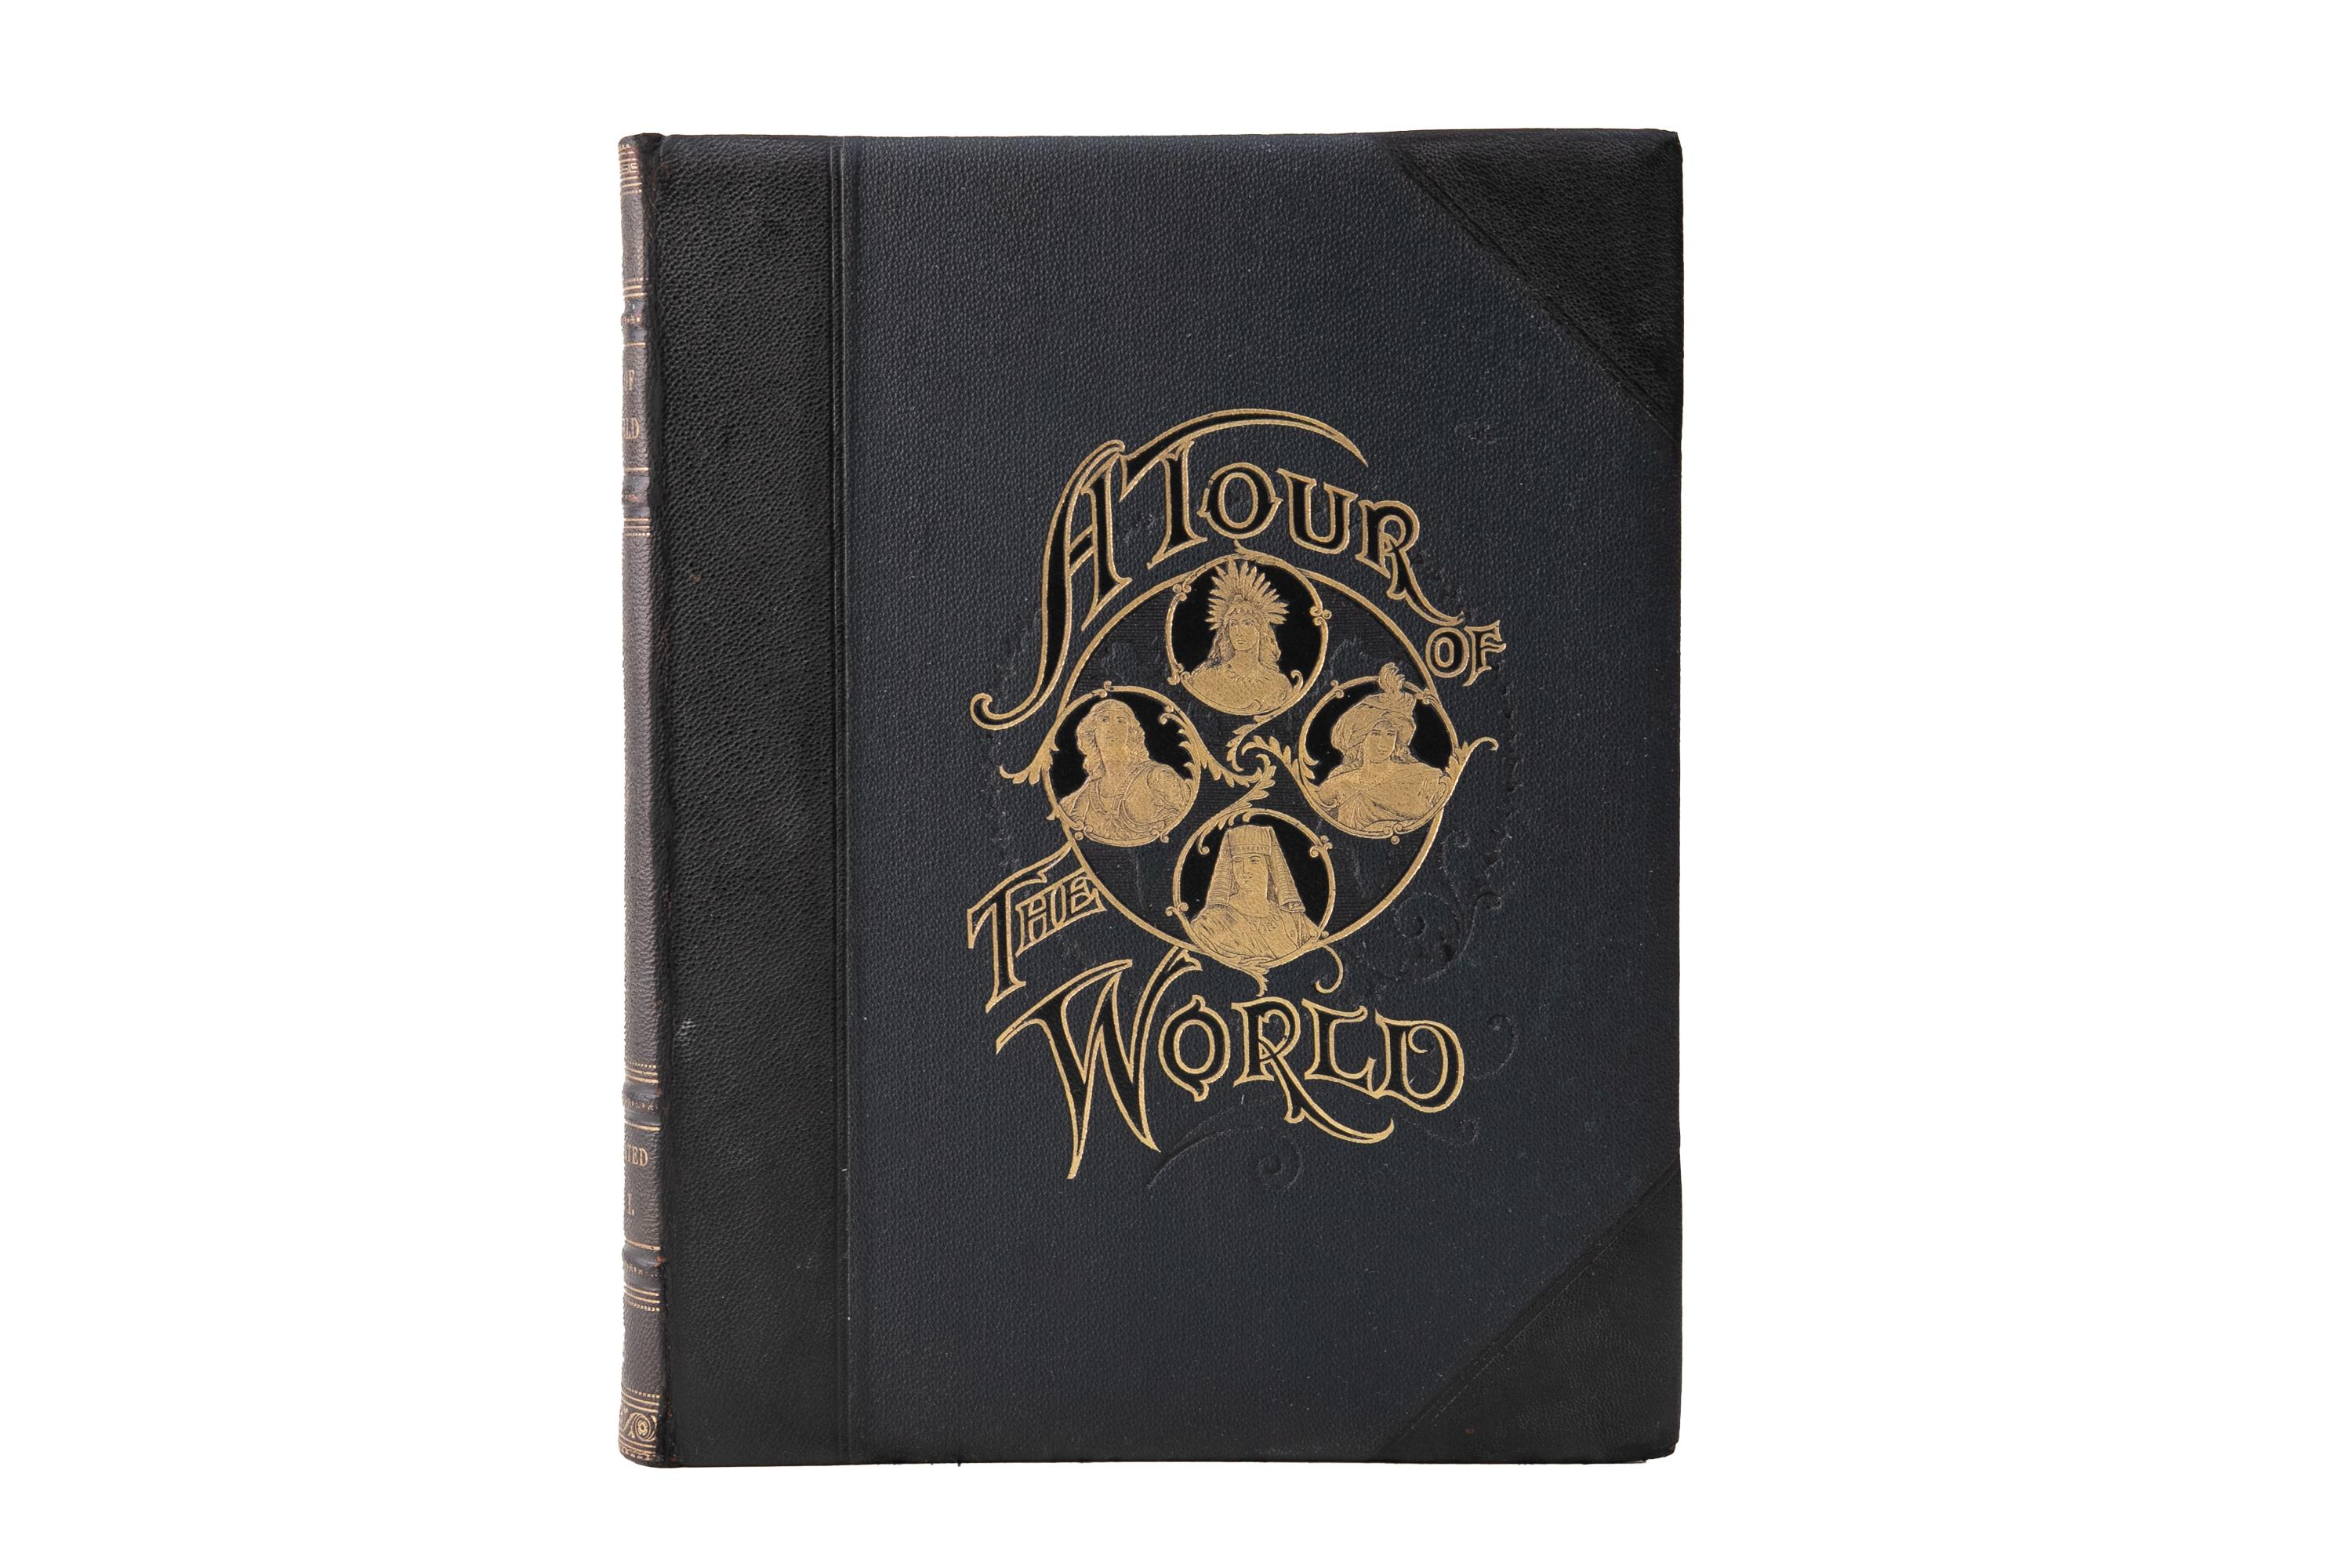 4 Volumes. (Travel) A tour of the World. Bound in 3/4 navy morocco with the covers and raised band spines displaying ornate gilt-tooled imagery. All edges are gilt. Illustrated in color, black, and white. Edited by Professor Leo de Colange with an